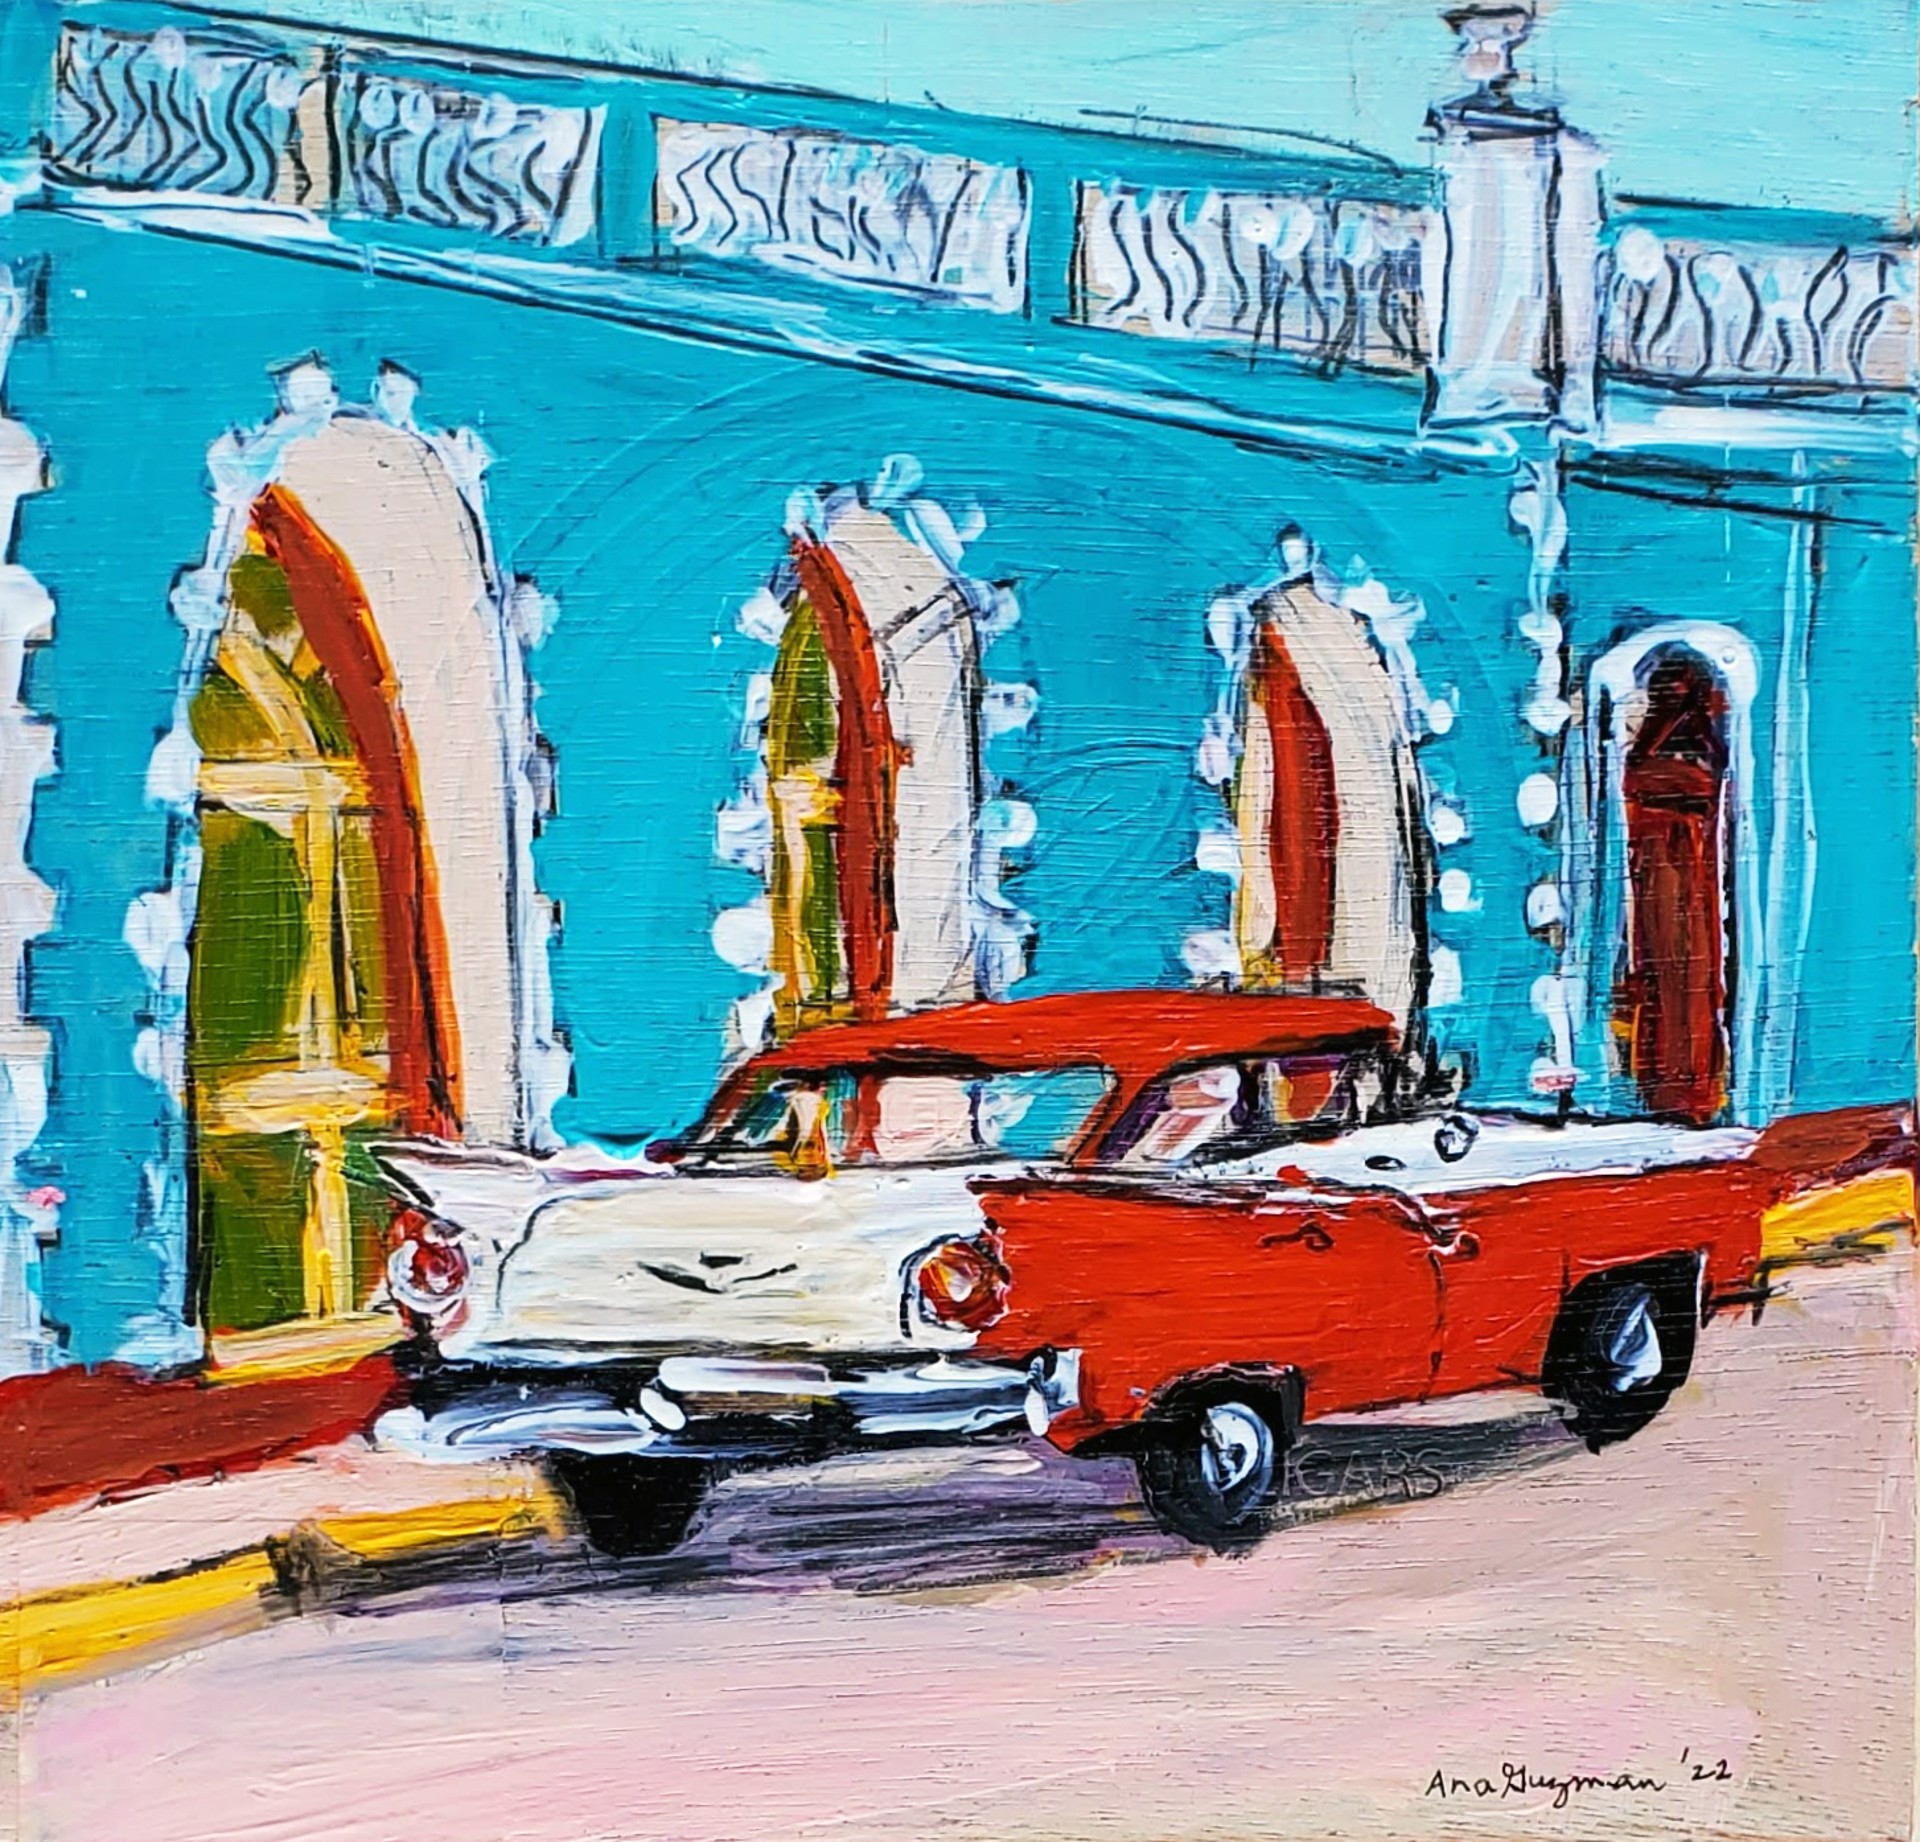 Red and White Car/Blue Building - Cigar Box by Ana Guzman